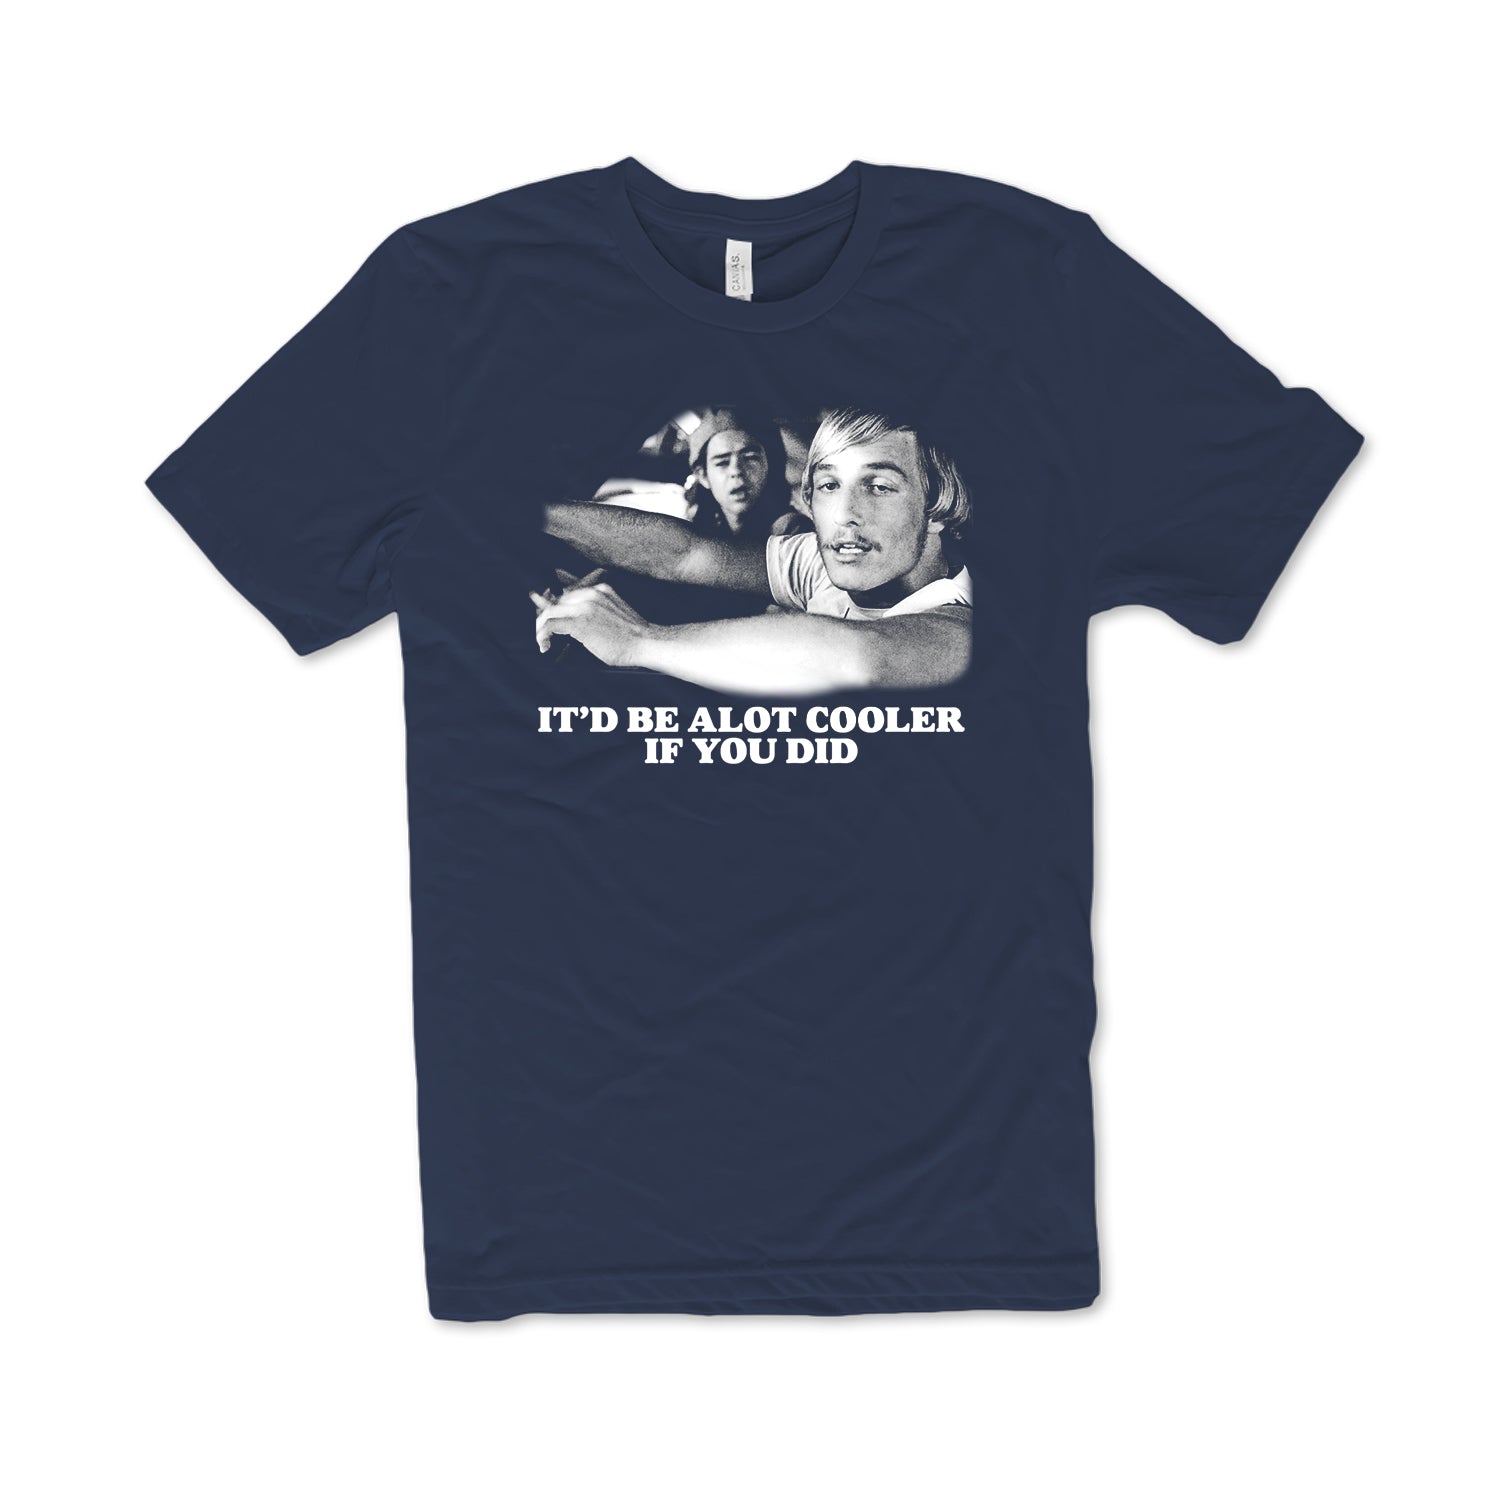 90s Movie Shirt Dazed and confused A lot Cooler If you did Bella Canvas Navy Blue Shirt